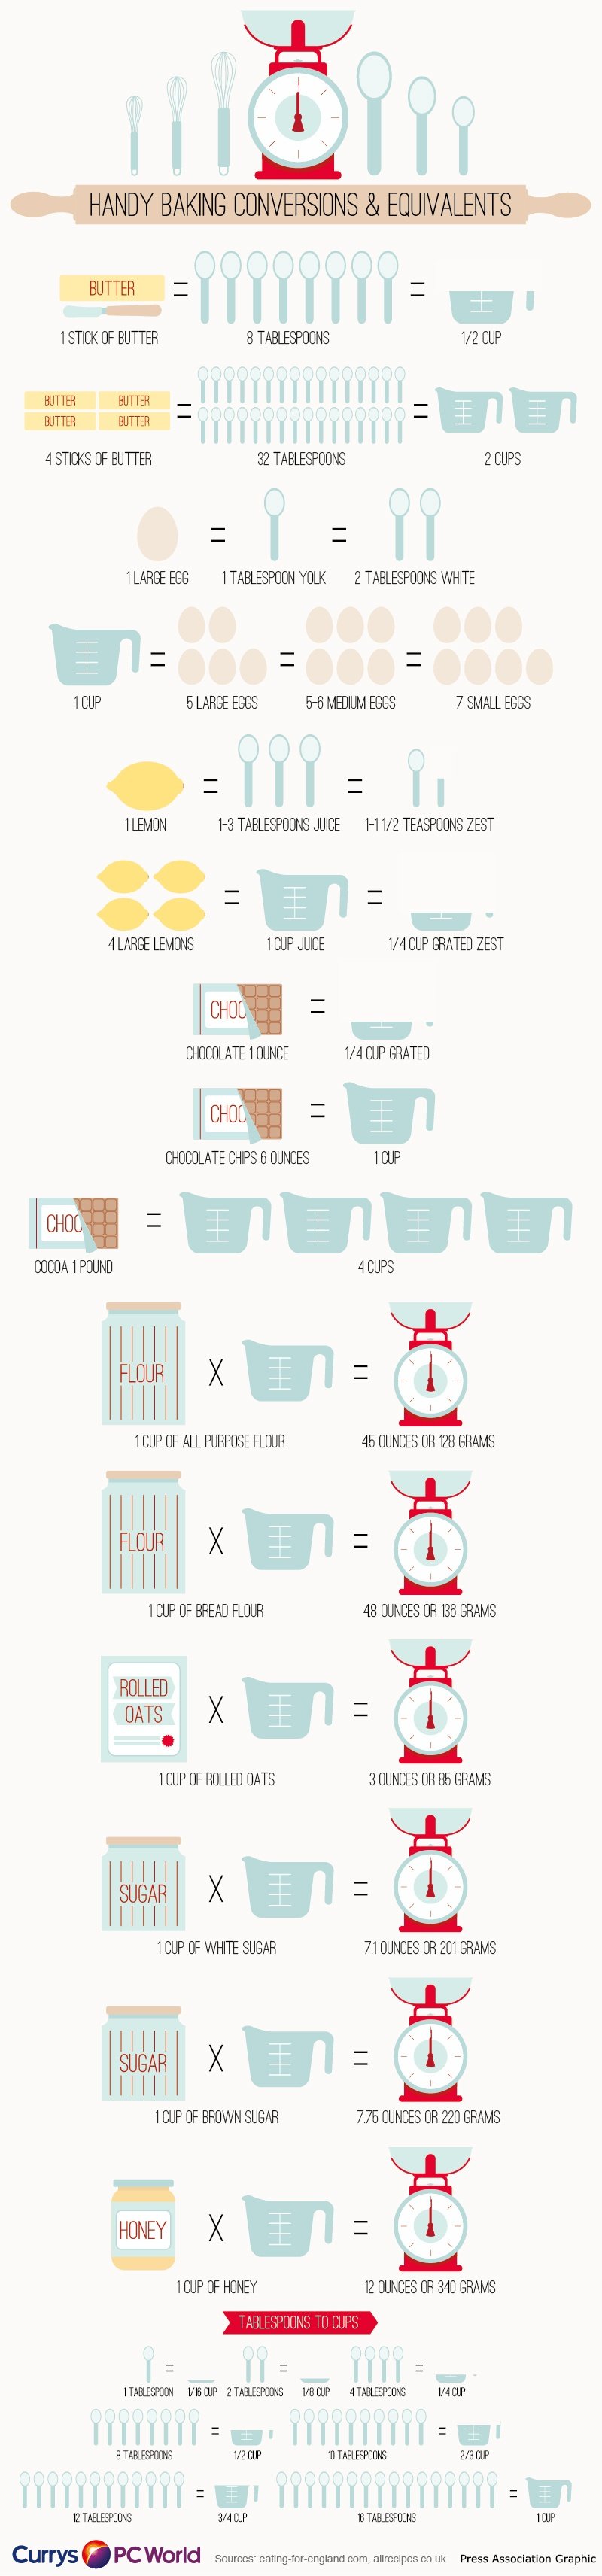 handy-baking-conversions-and-equivalents-infographic